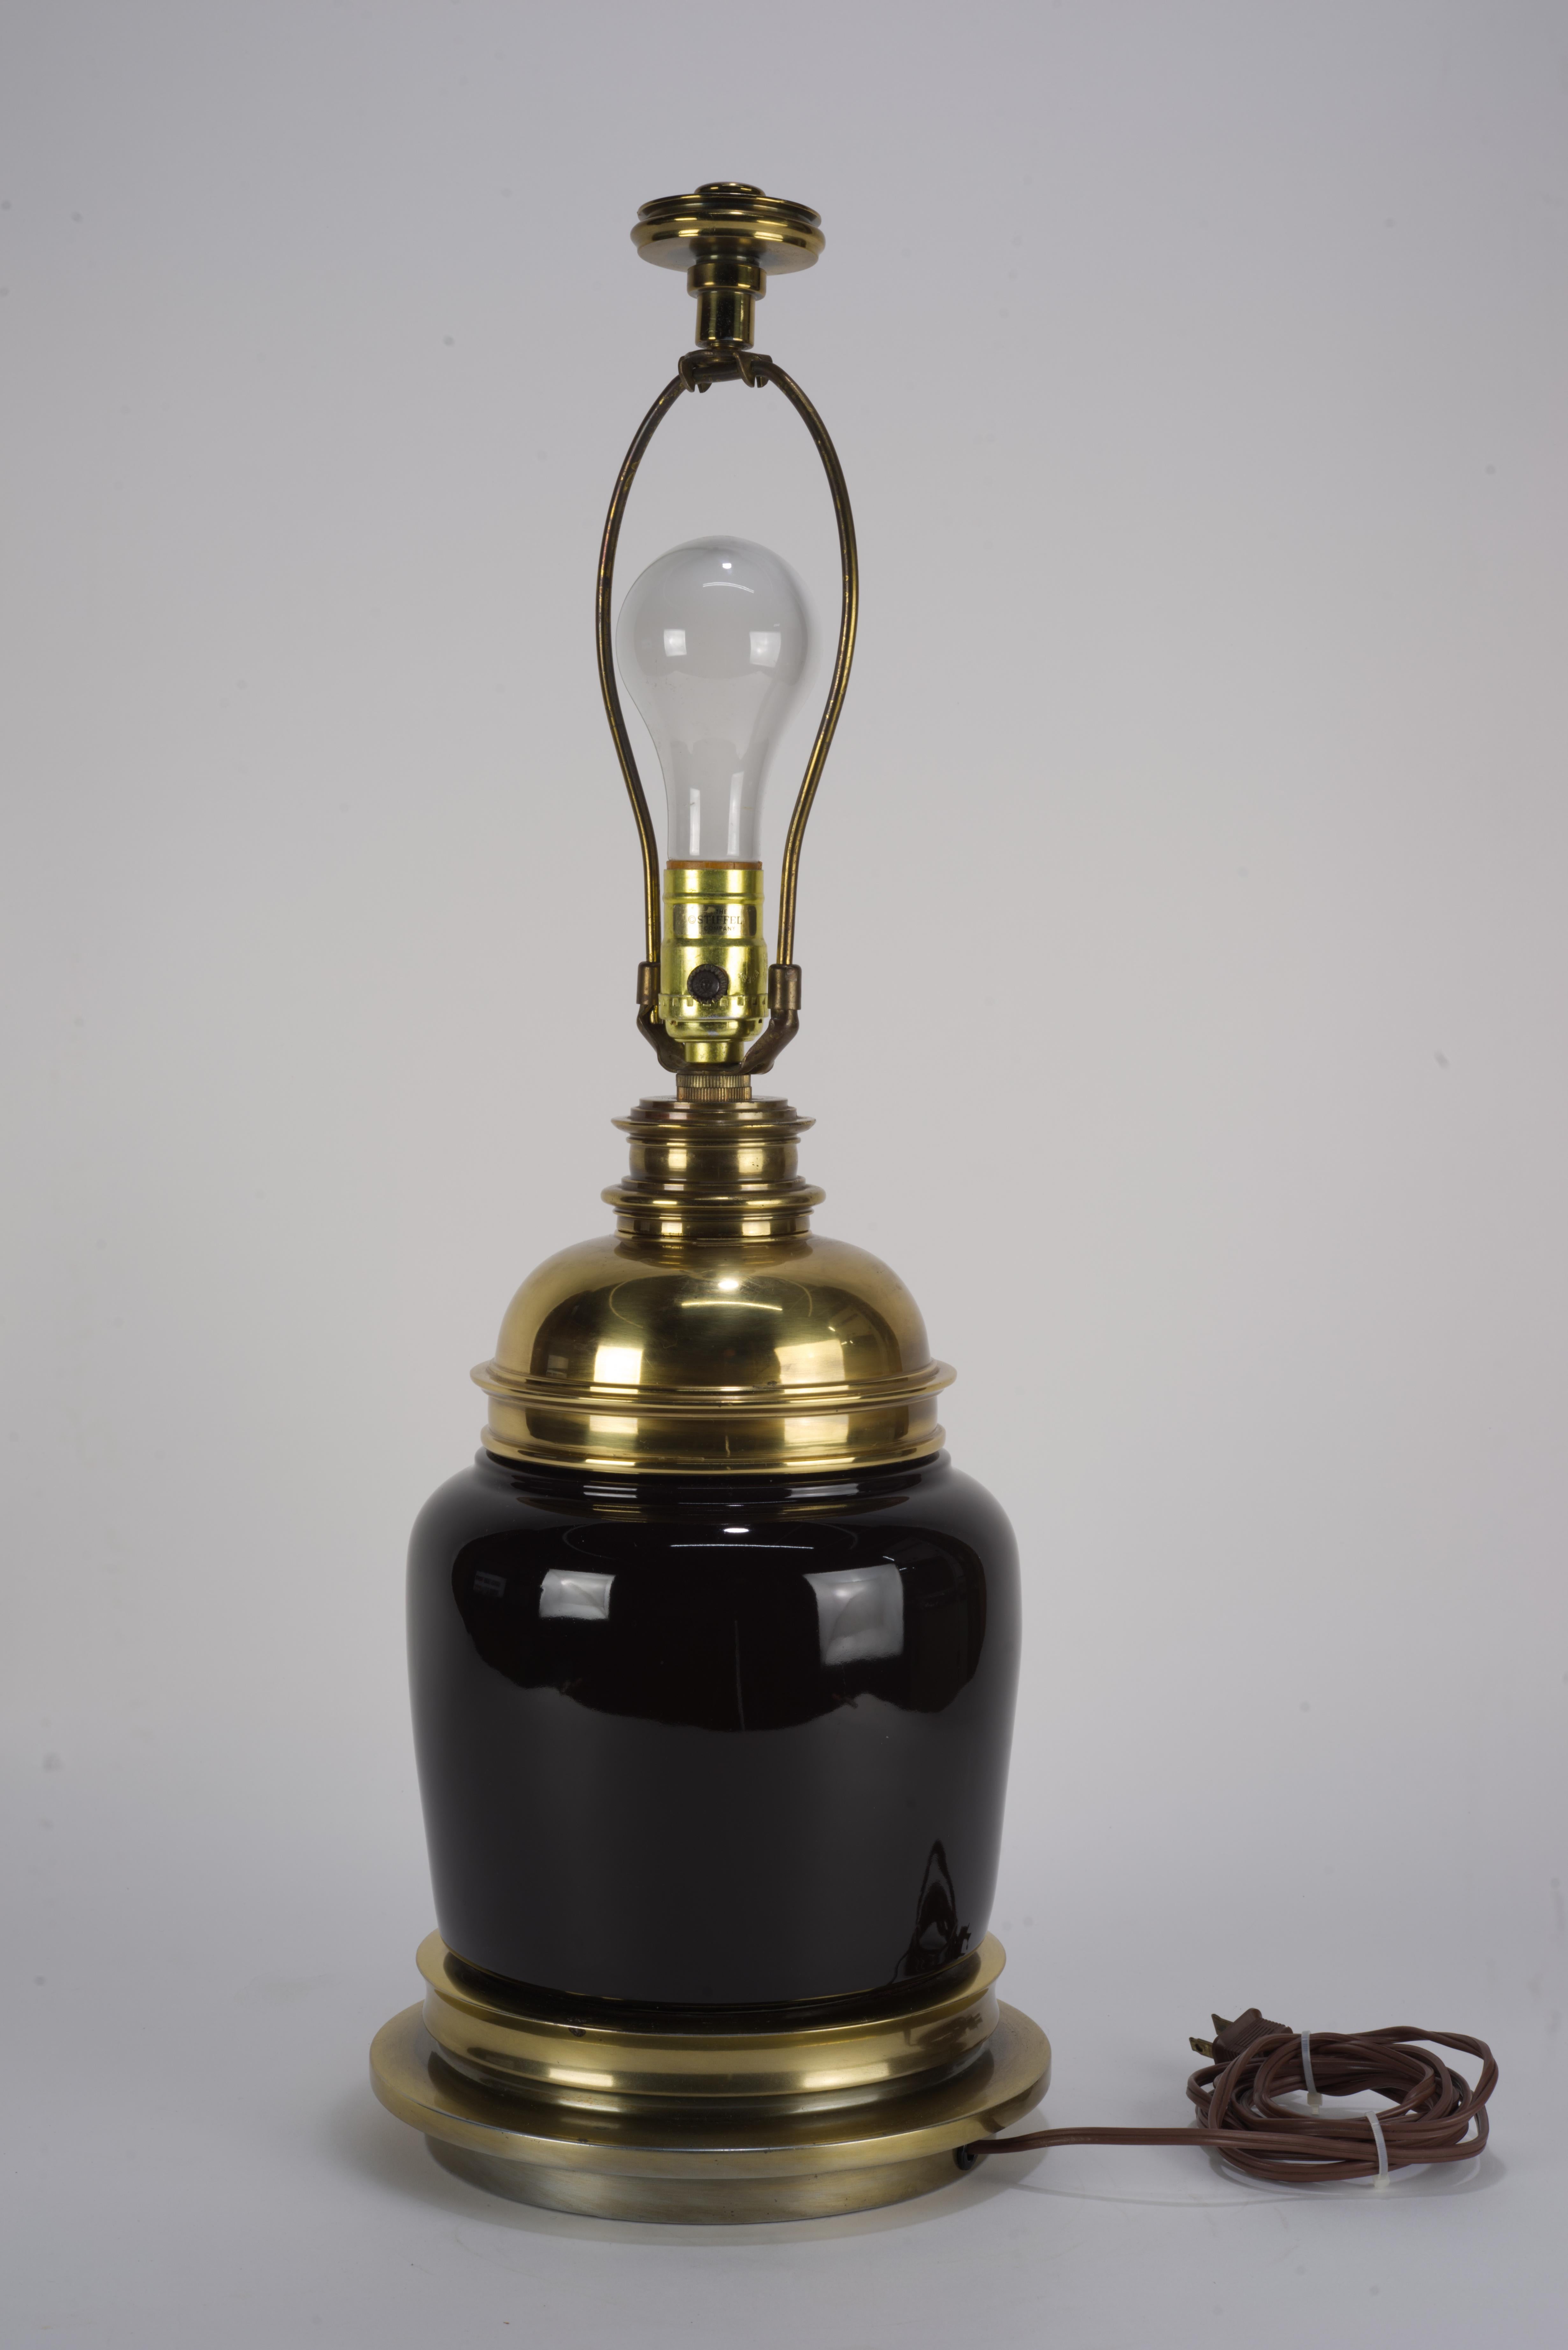  Large table lamp was made by Stiffel in traditional style with heavy brass accents and the base and statement black ceramic body. It has the original harp and finial.

The lamp measures24.5